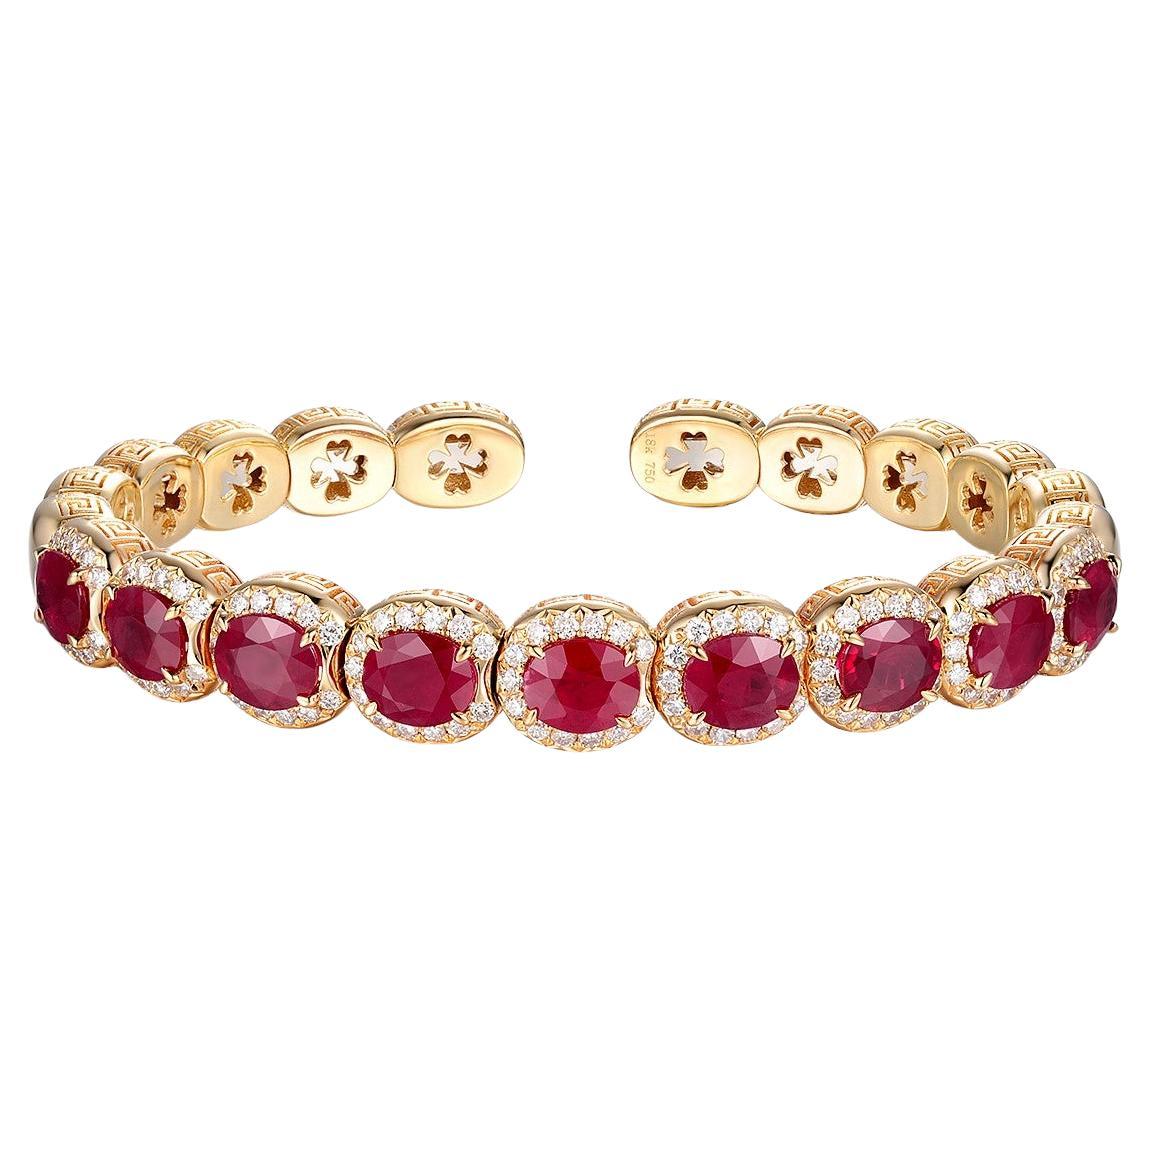 Introducing the stunning Ruby Diamond Steel Bracelet, now available in an open cuff design for added comfort and versatility. Crafted from high-quality 18 Karat Yellow Gold, this beautiful bracelet features 9 oval rubies, weighing a total of 7.55